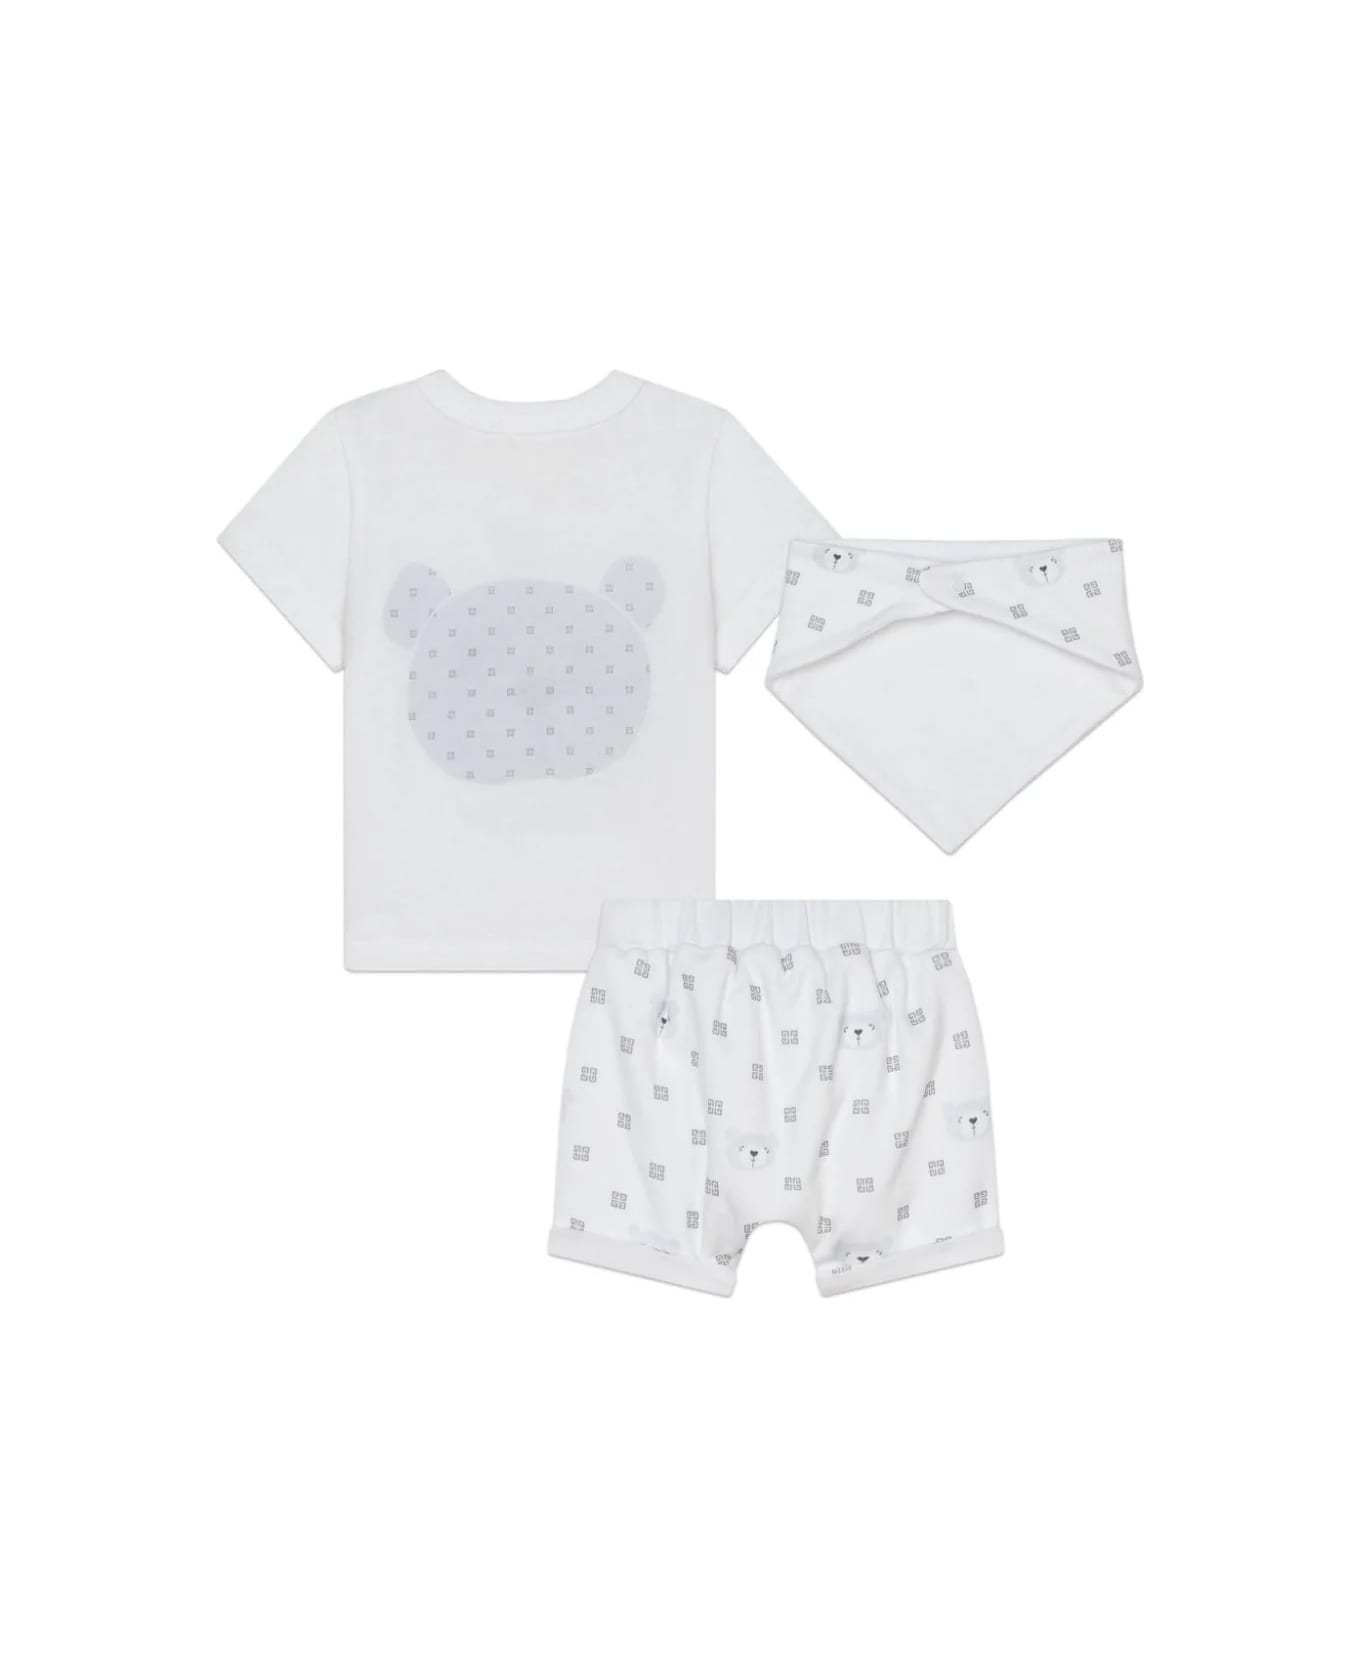 Givenchy Set With Printed Cotton T-shirt, Shorts And Bandana - White ボディスーツ＆セットアップ